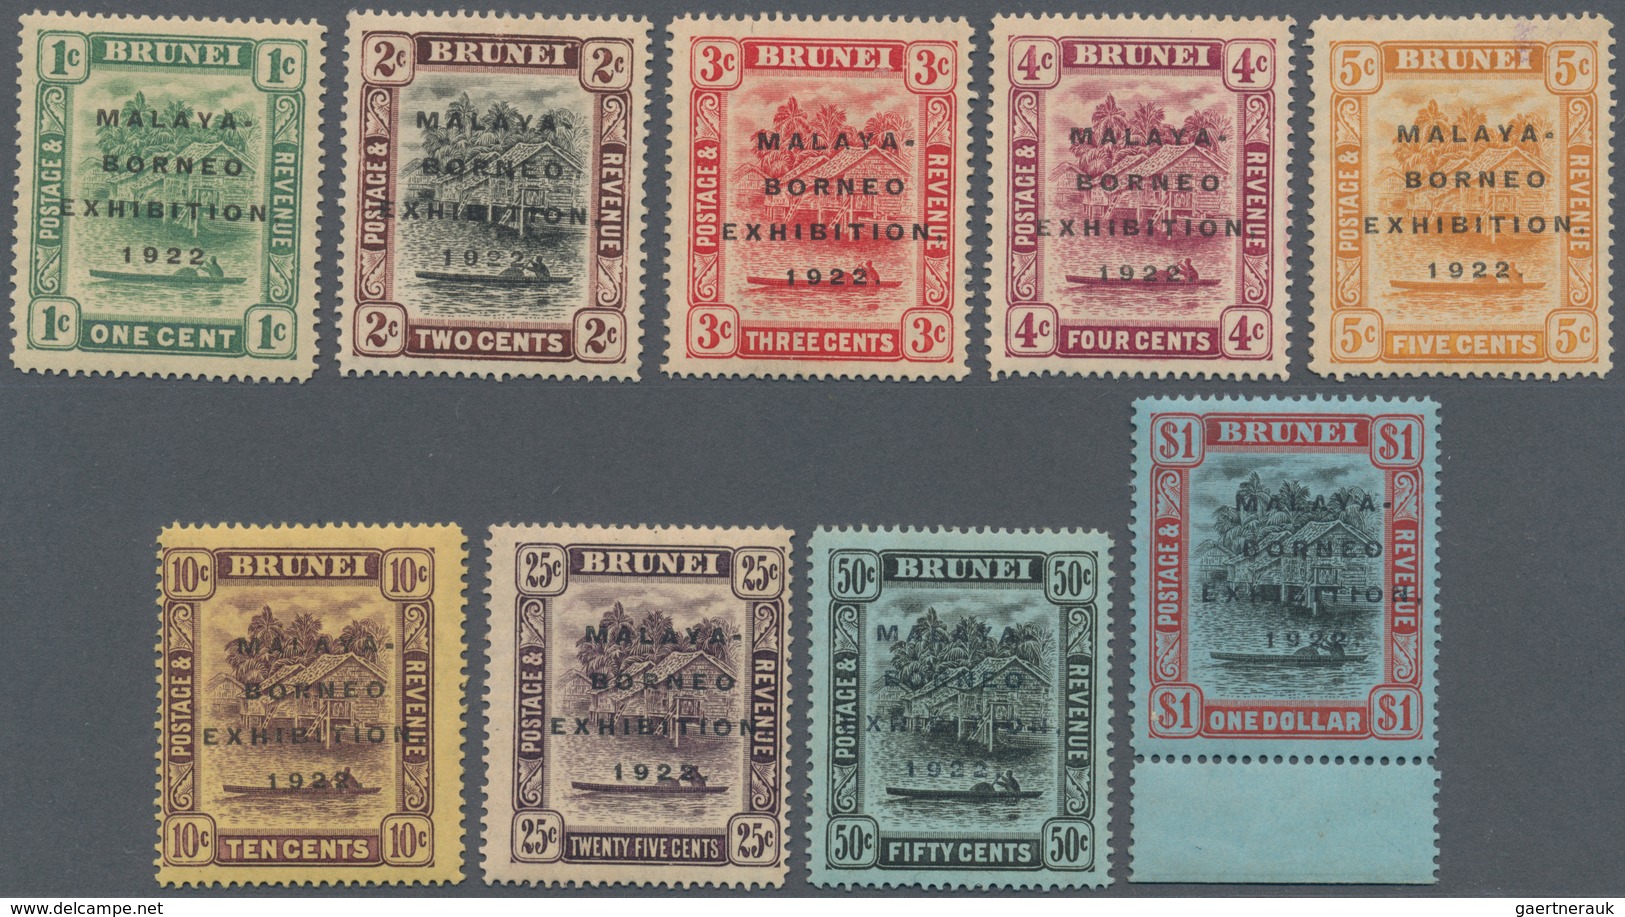 05029 Brunei: 1922, Malaya-Borneo Exhibition Complete Set Of 9 Mint Hinged ($1 From Lower Margin), SG. £ 2 - Brunei (1984-...)